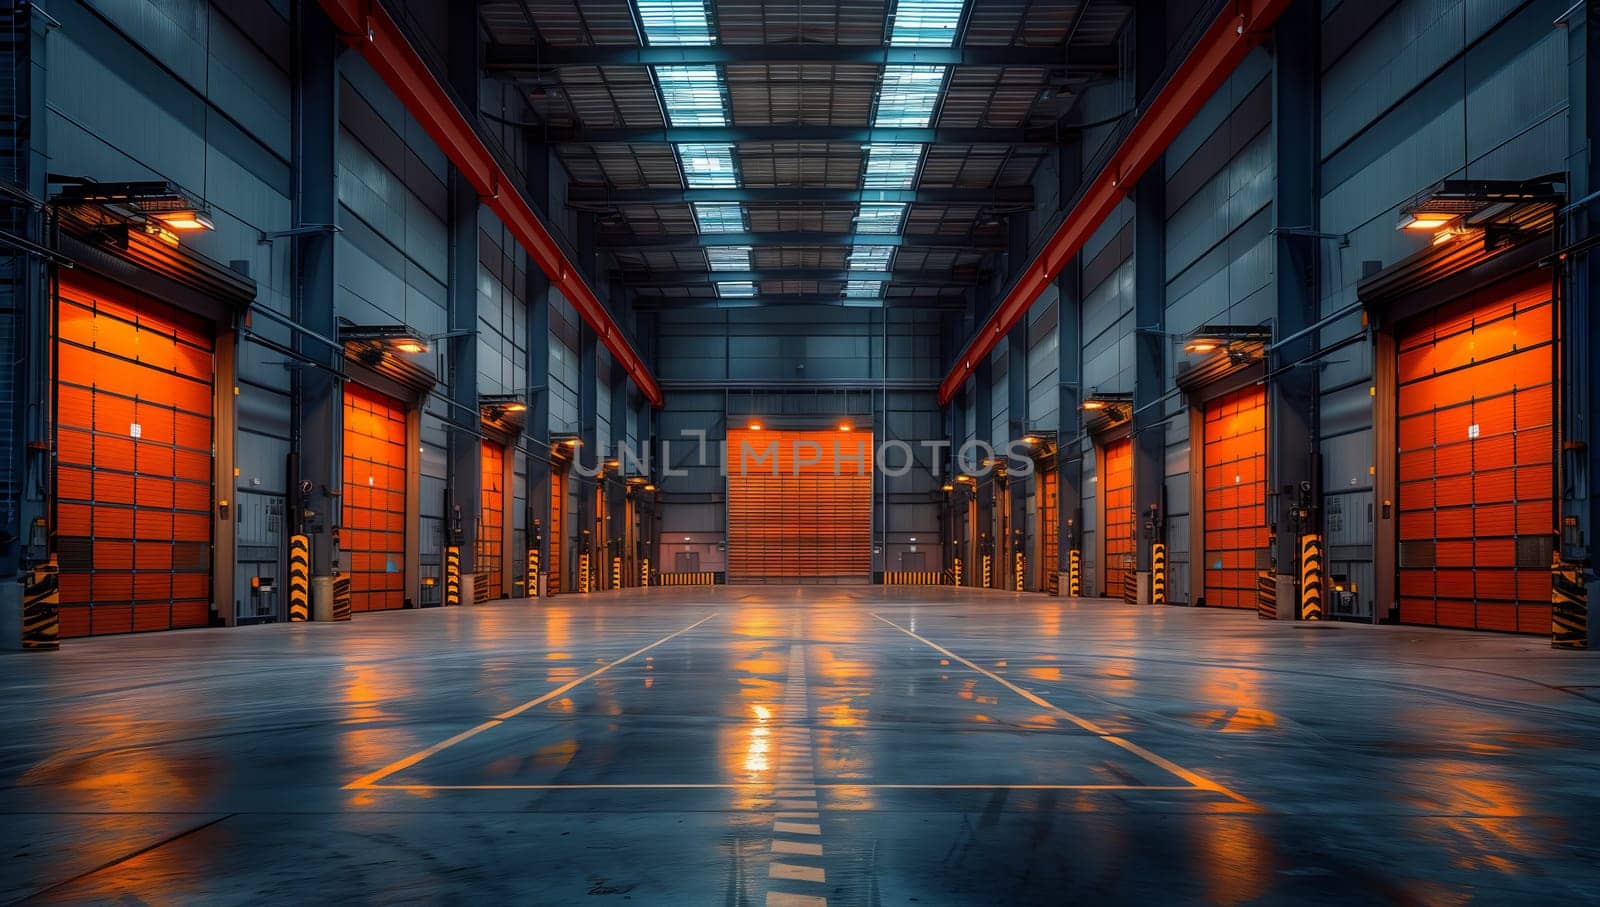 A building with numerous bright orange doors and a sturdy concrete floor. The symmetrical design and electric blue accents make it stand out in the city